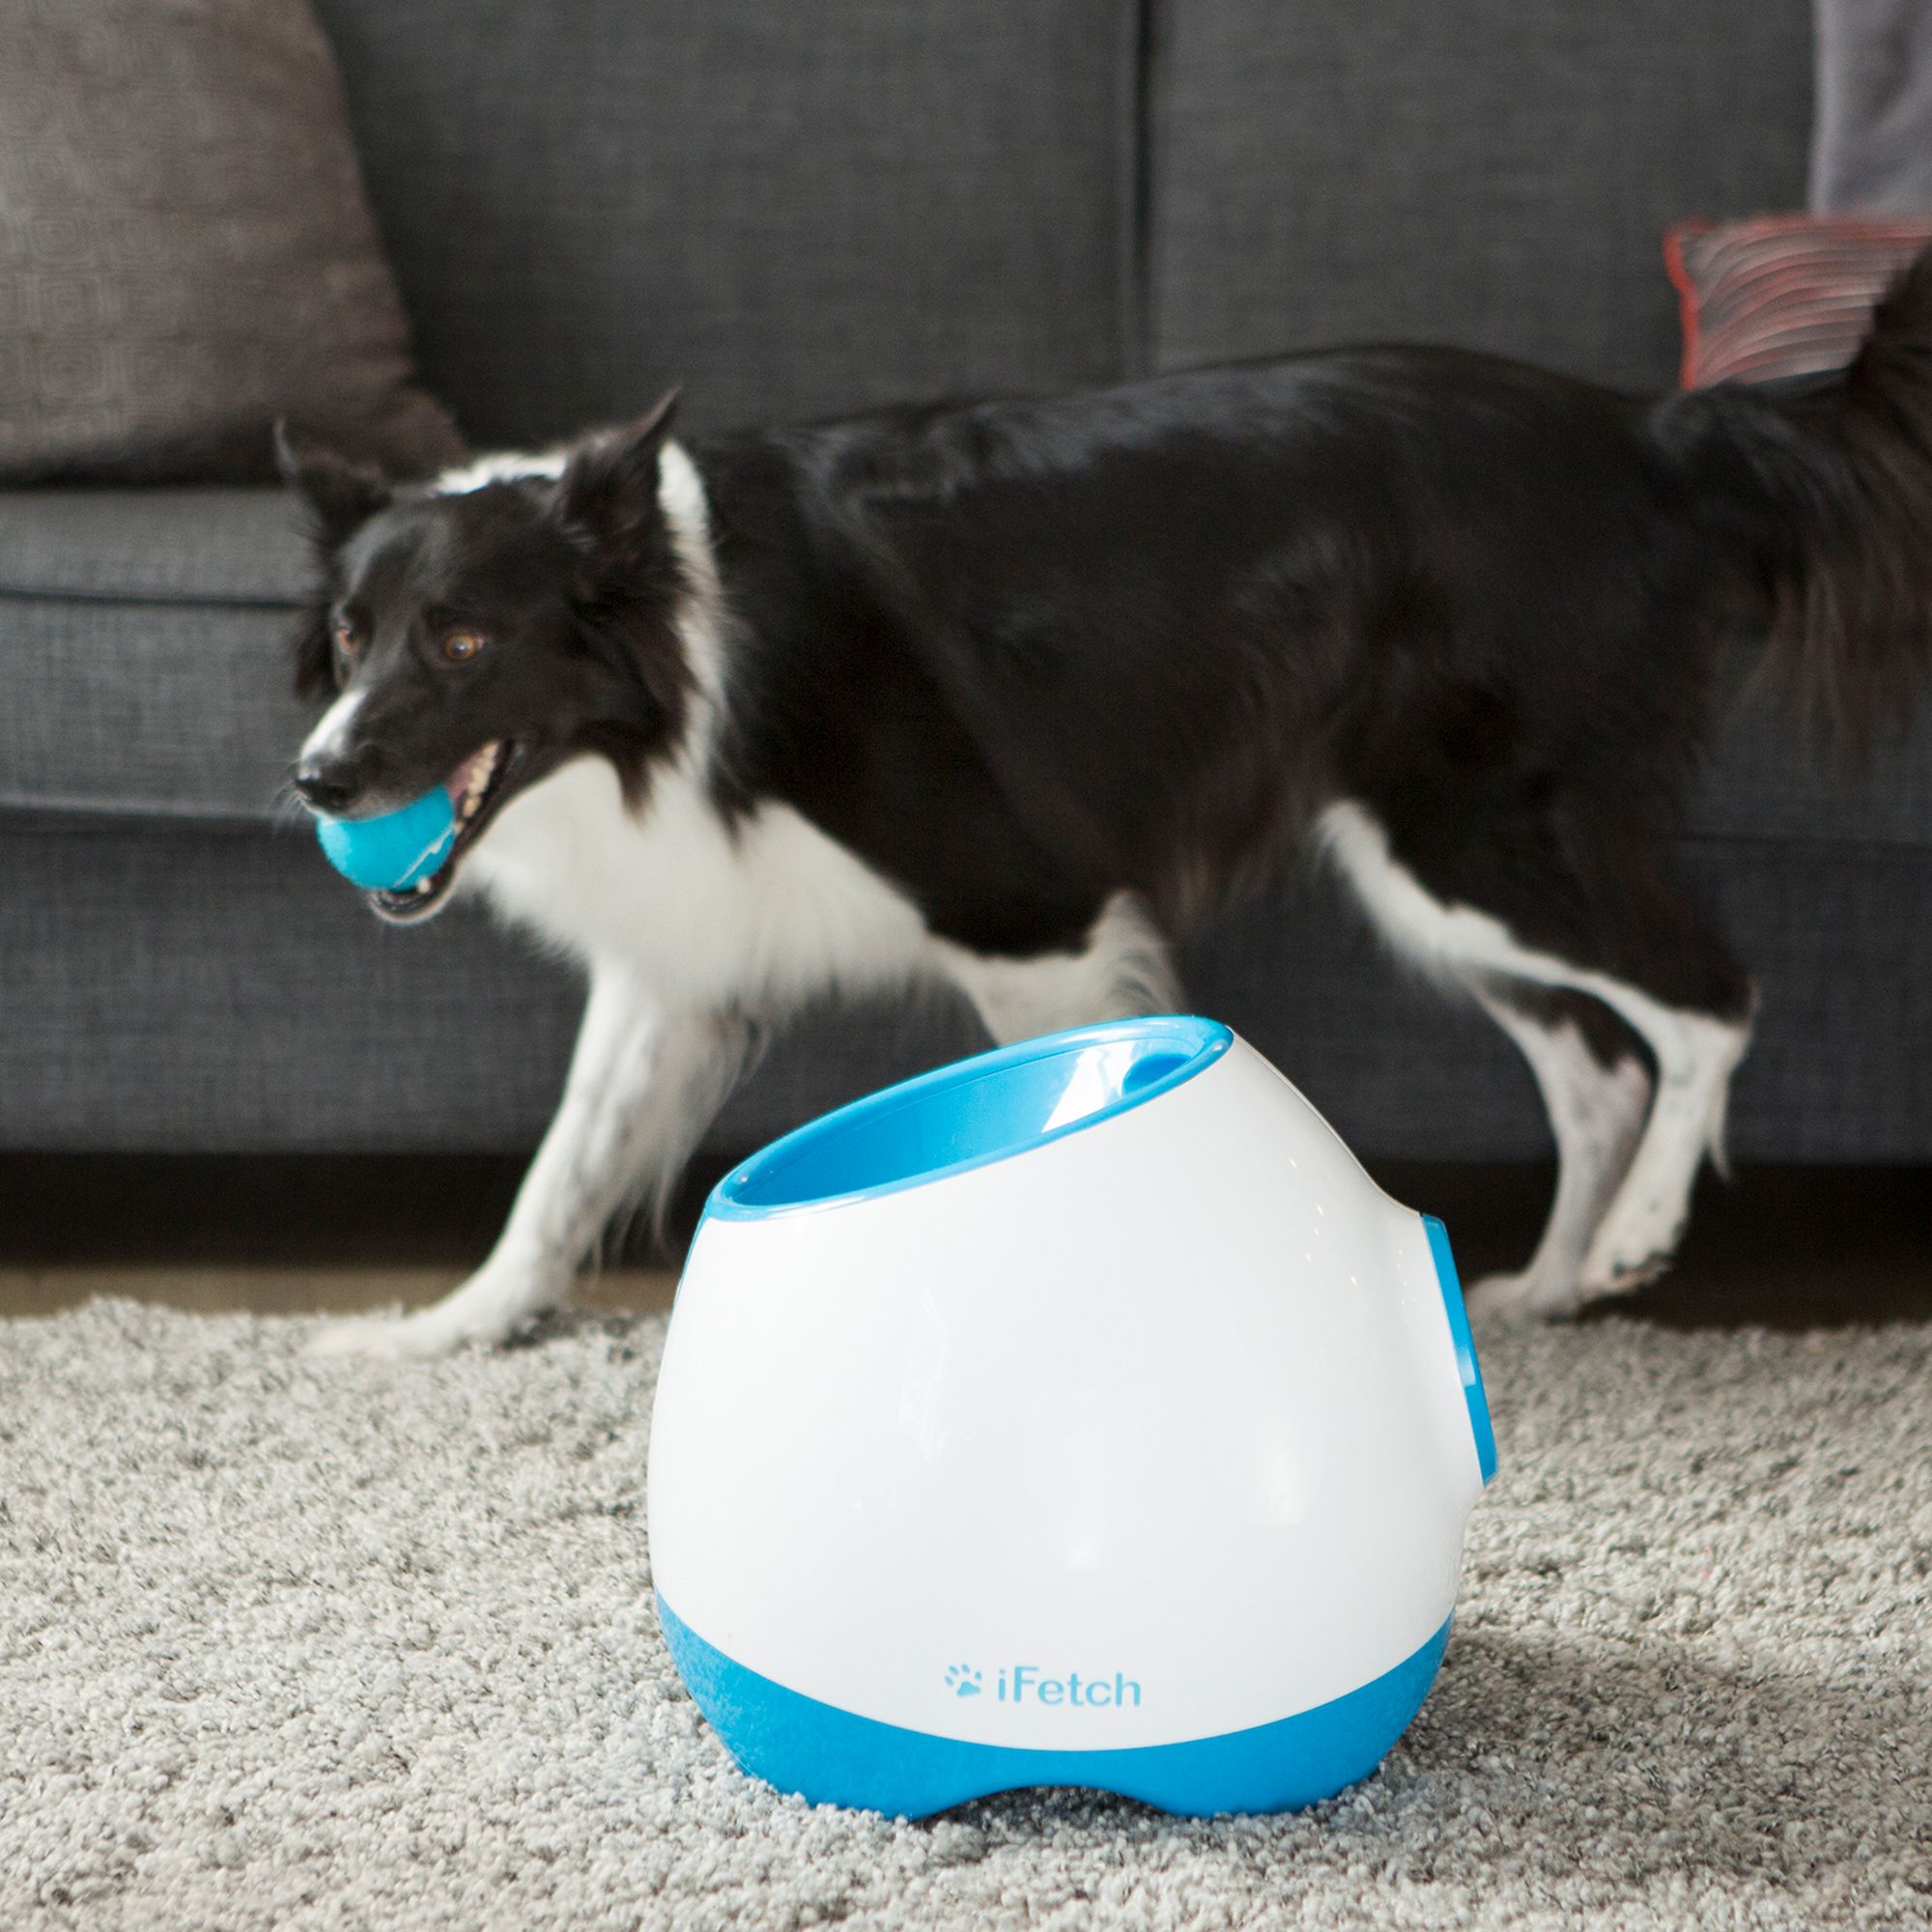 ifetch interactive ball launchers for dogs